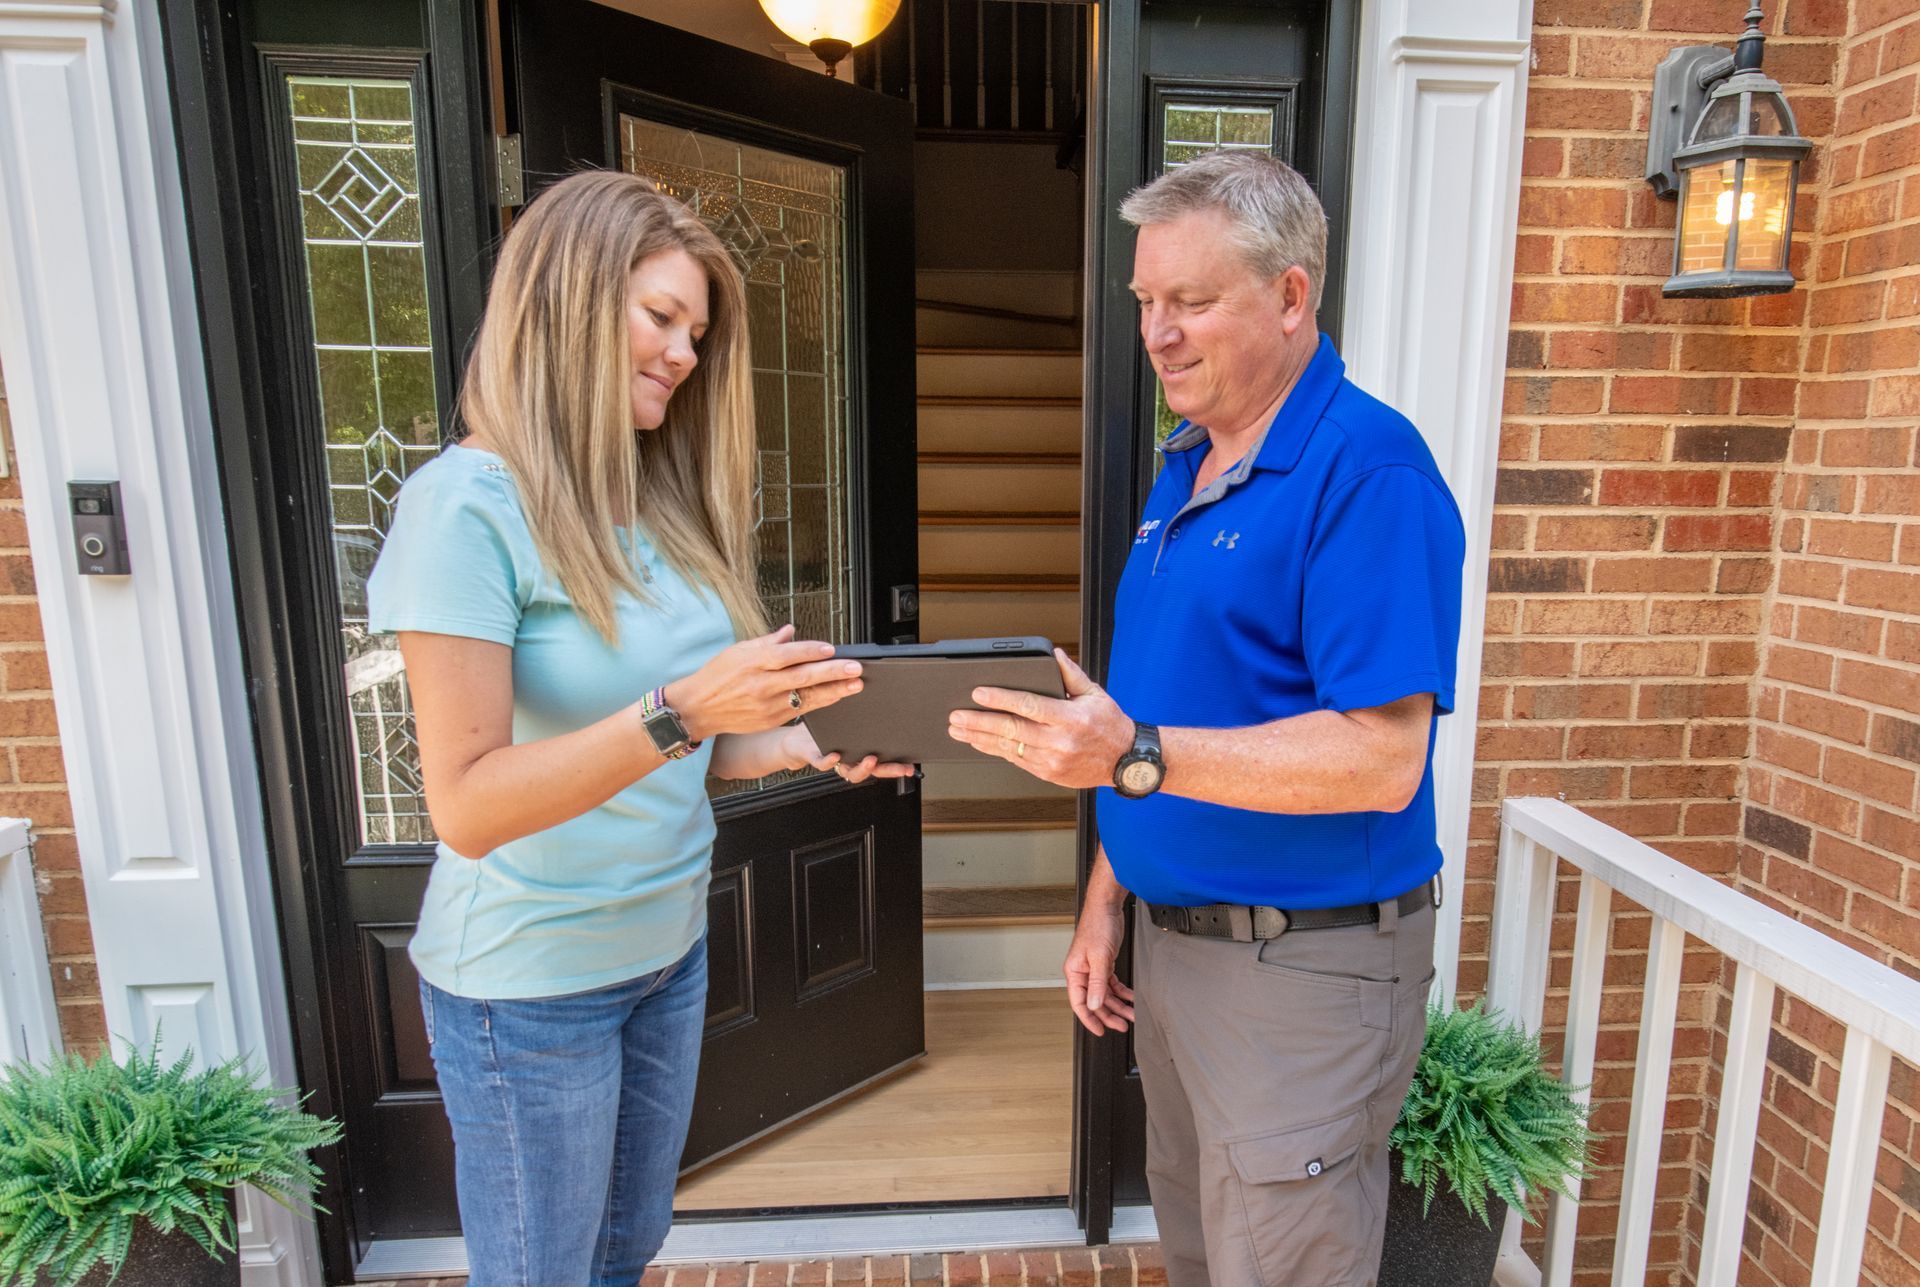 An All City Heat and Air technician and a woman are standing in front of a brick house looking at a tablet.